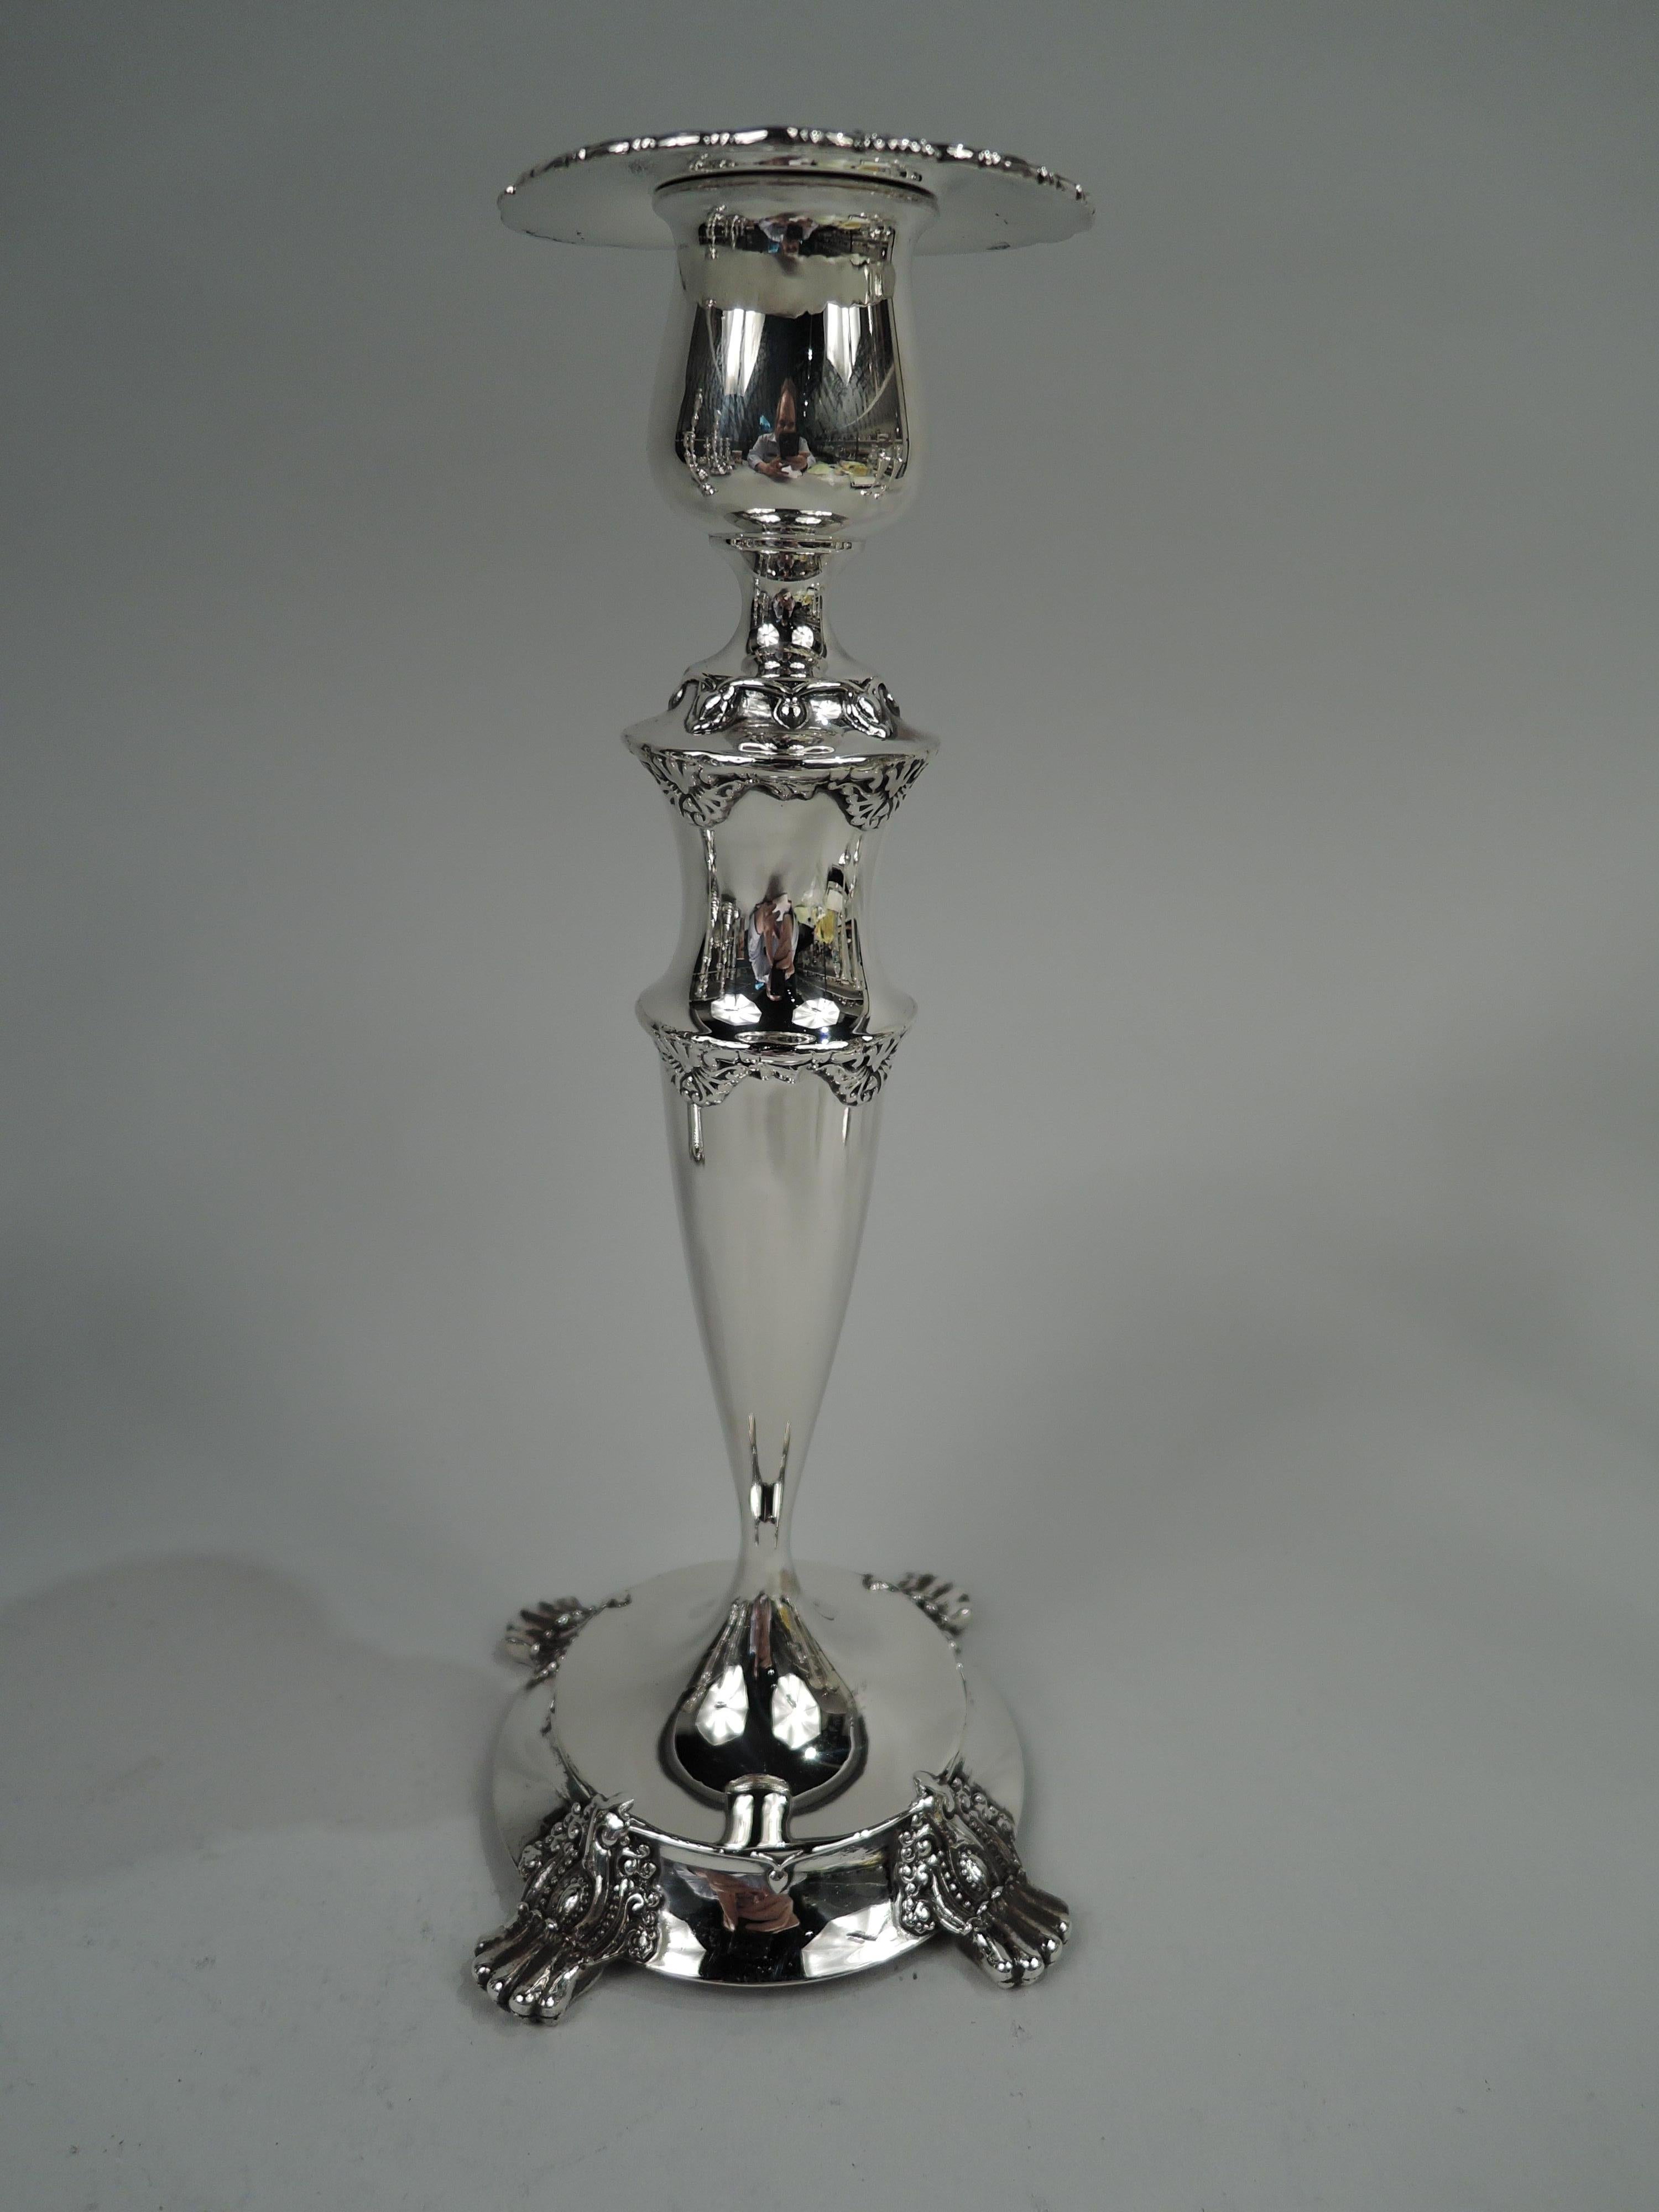 Pair of Edwardian Classical sterling silver candlesticks. Made by Tiffany & Co. in New York. Each: Urn socket with detachable bobeche on spool and ovoid shaft; raised foot with 4 cast beaded-scroll paw supports. Fully marked including maker’s stamp,